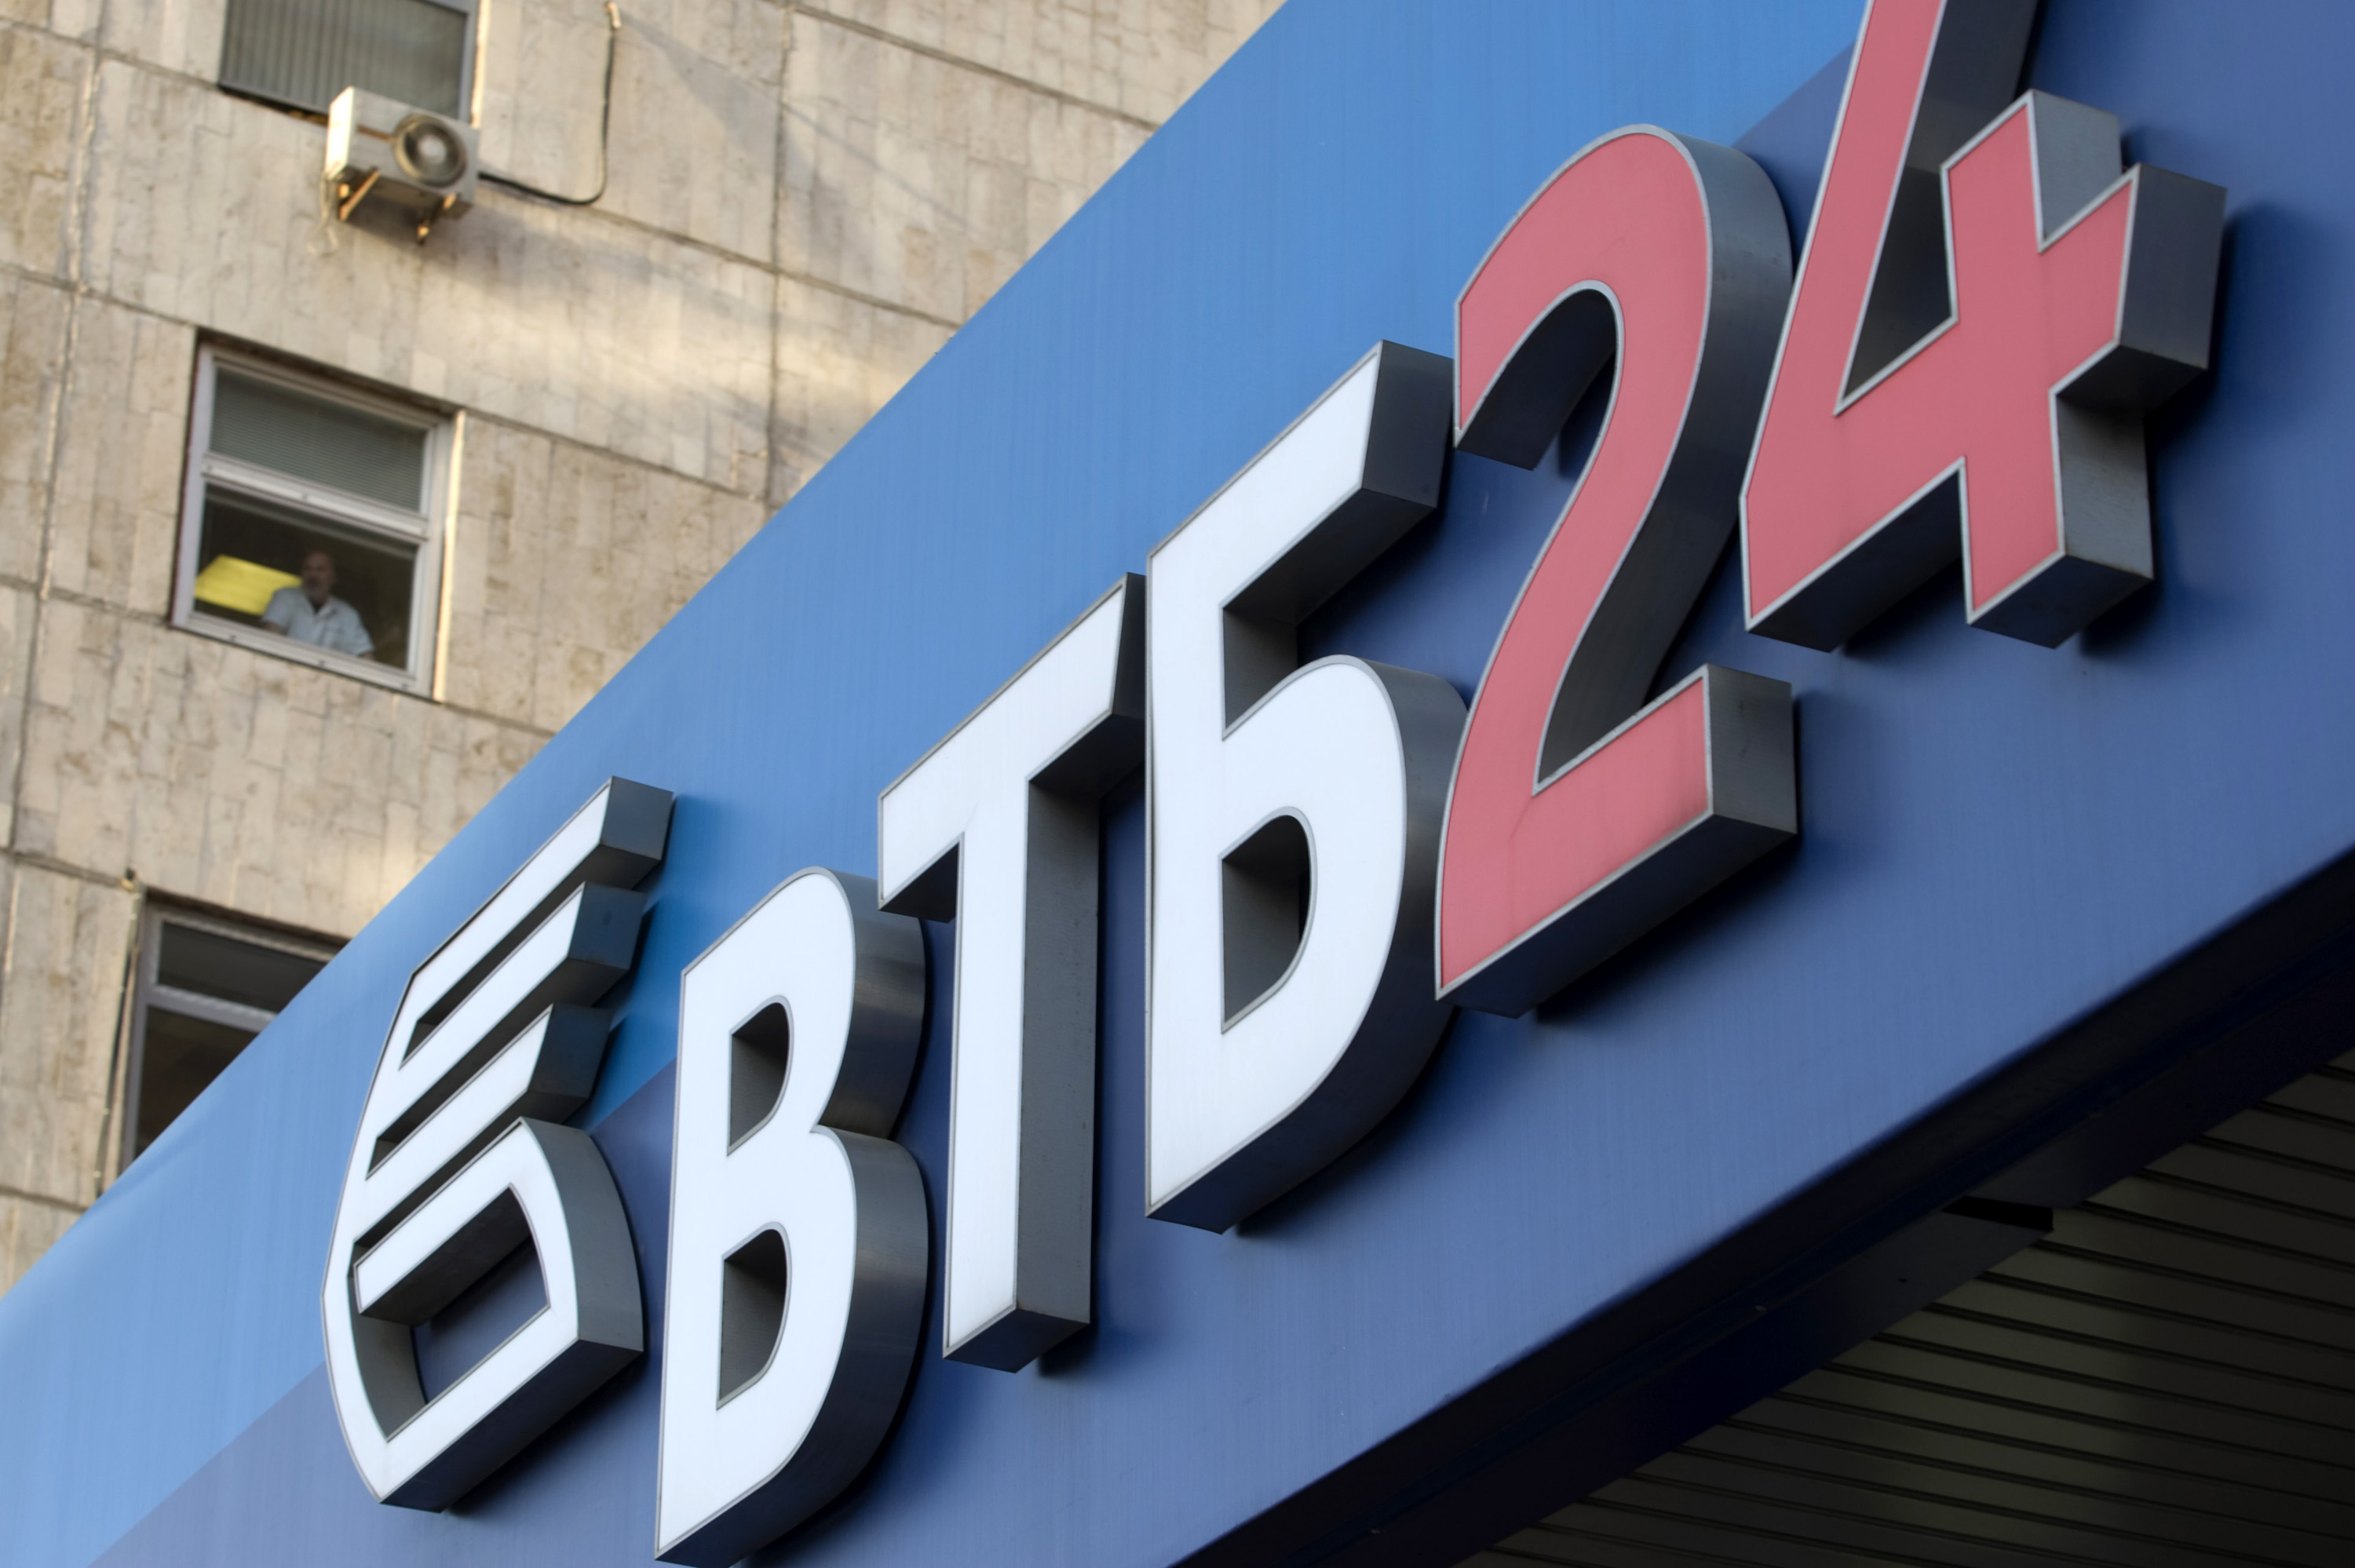 The company logo for the VTB Bank is displayed on a branch in Moscow, Russia, on Wednesday, Sept. 24, 2008. Forming part of the VTB Group the bank is also known as the Vneshtorgbank. Photographer: Alexander Zemlianichenko Jr/Bloomberg News